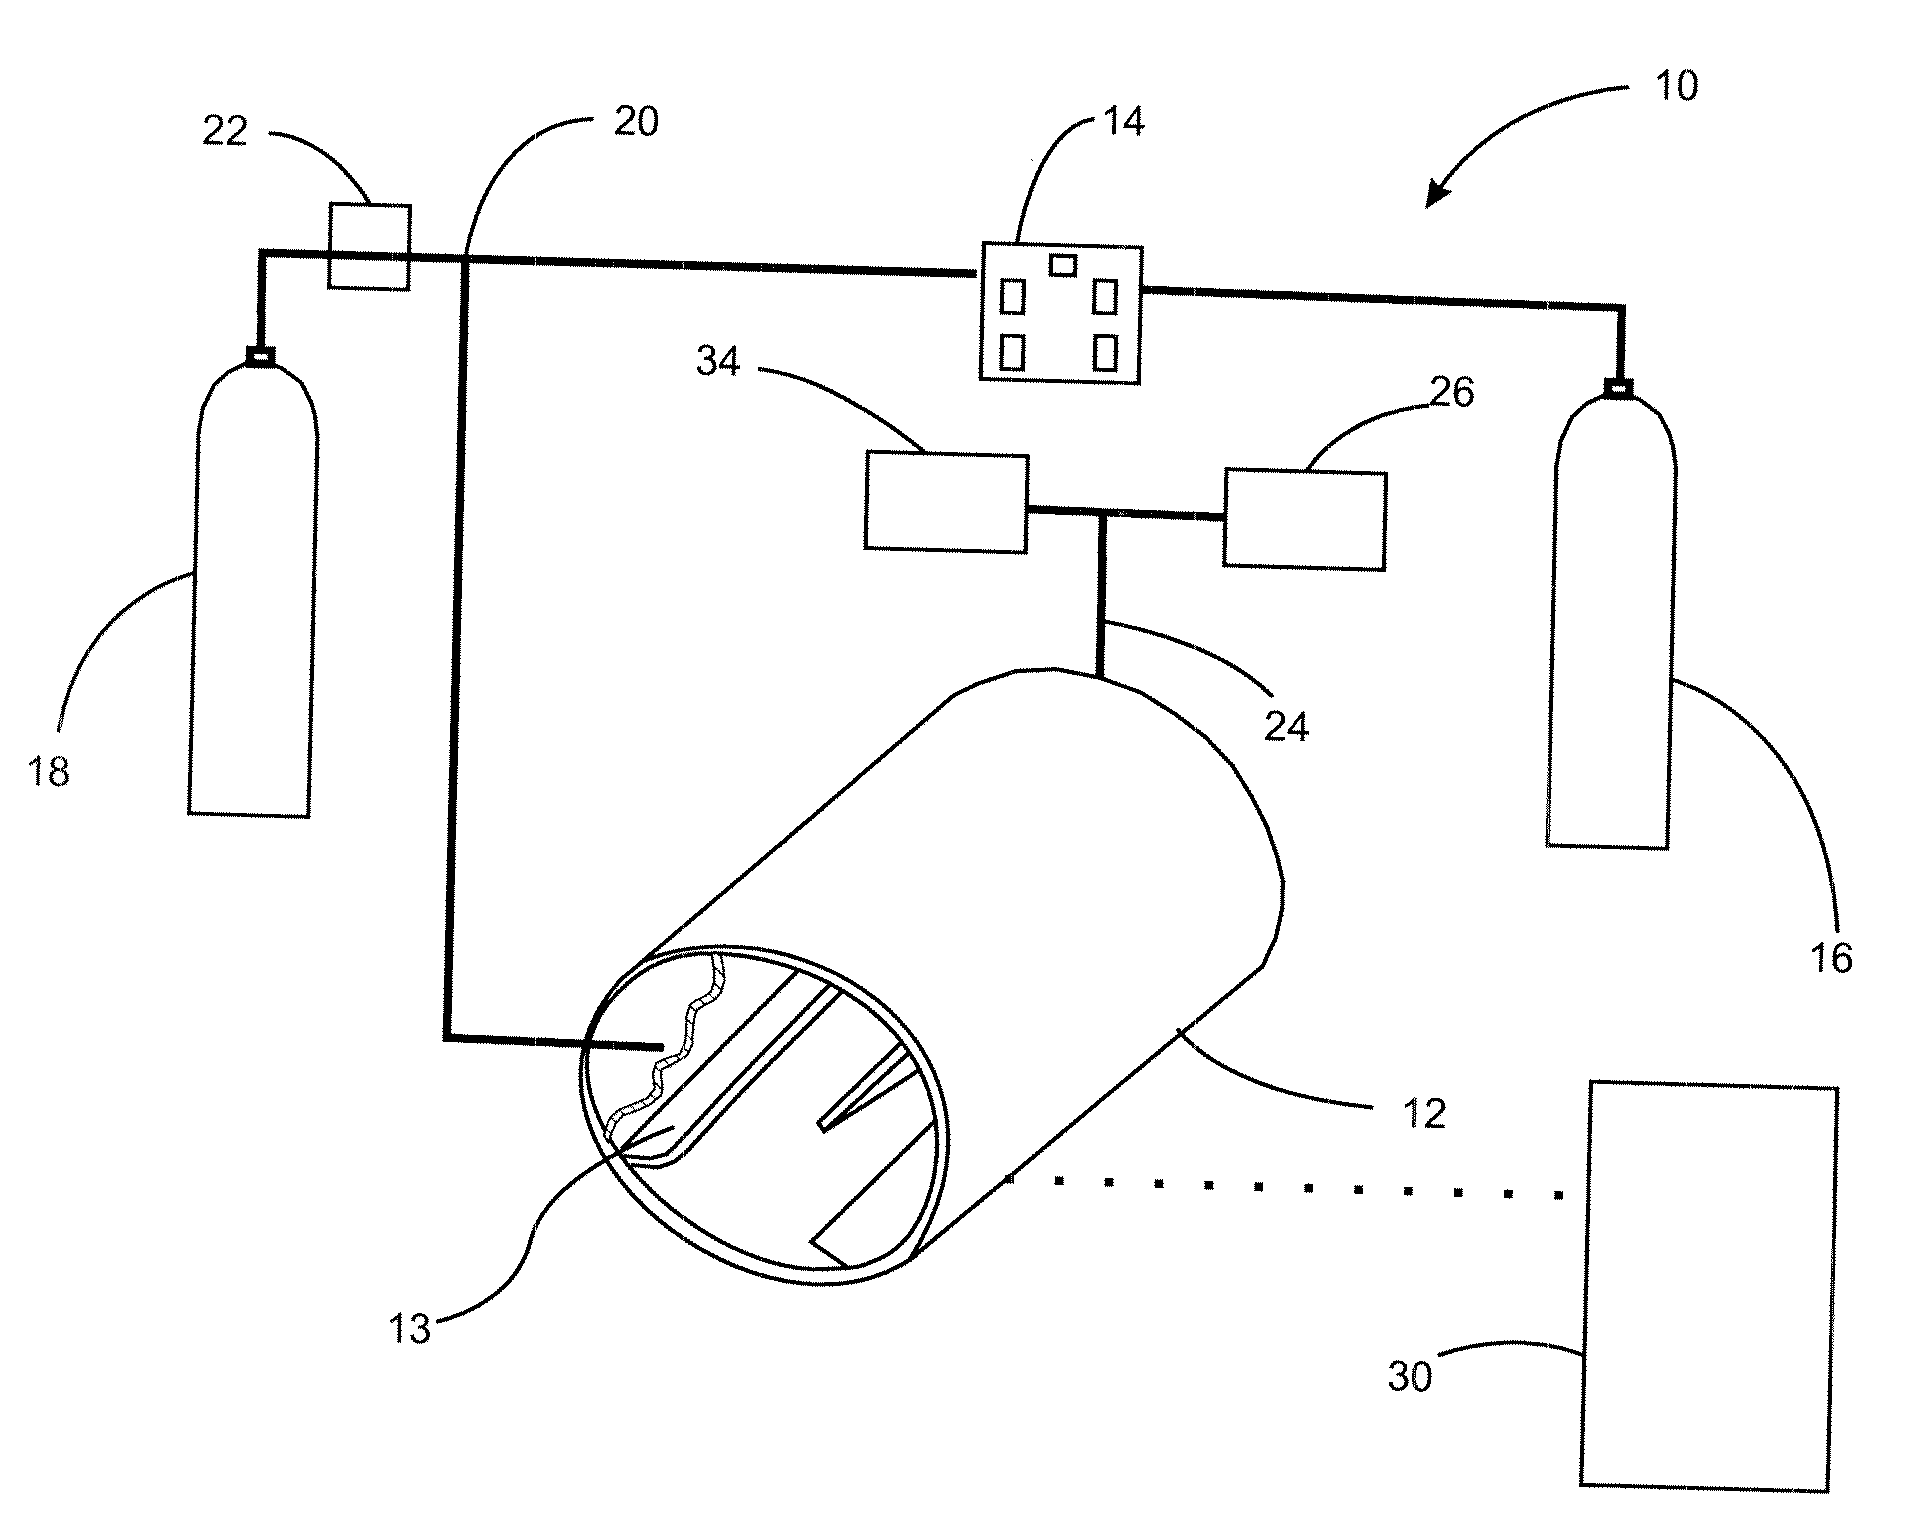 Method of sulfonating an article and related apparatus